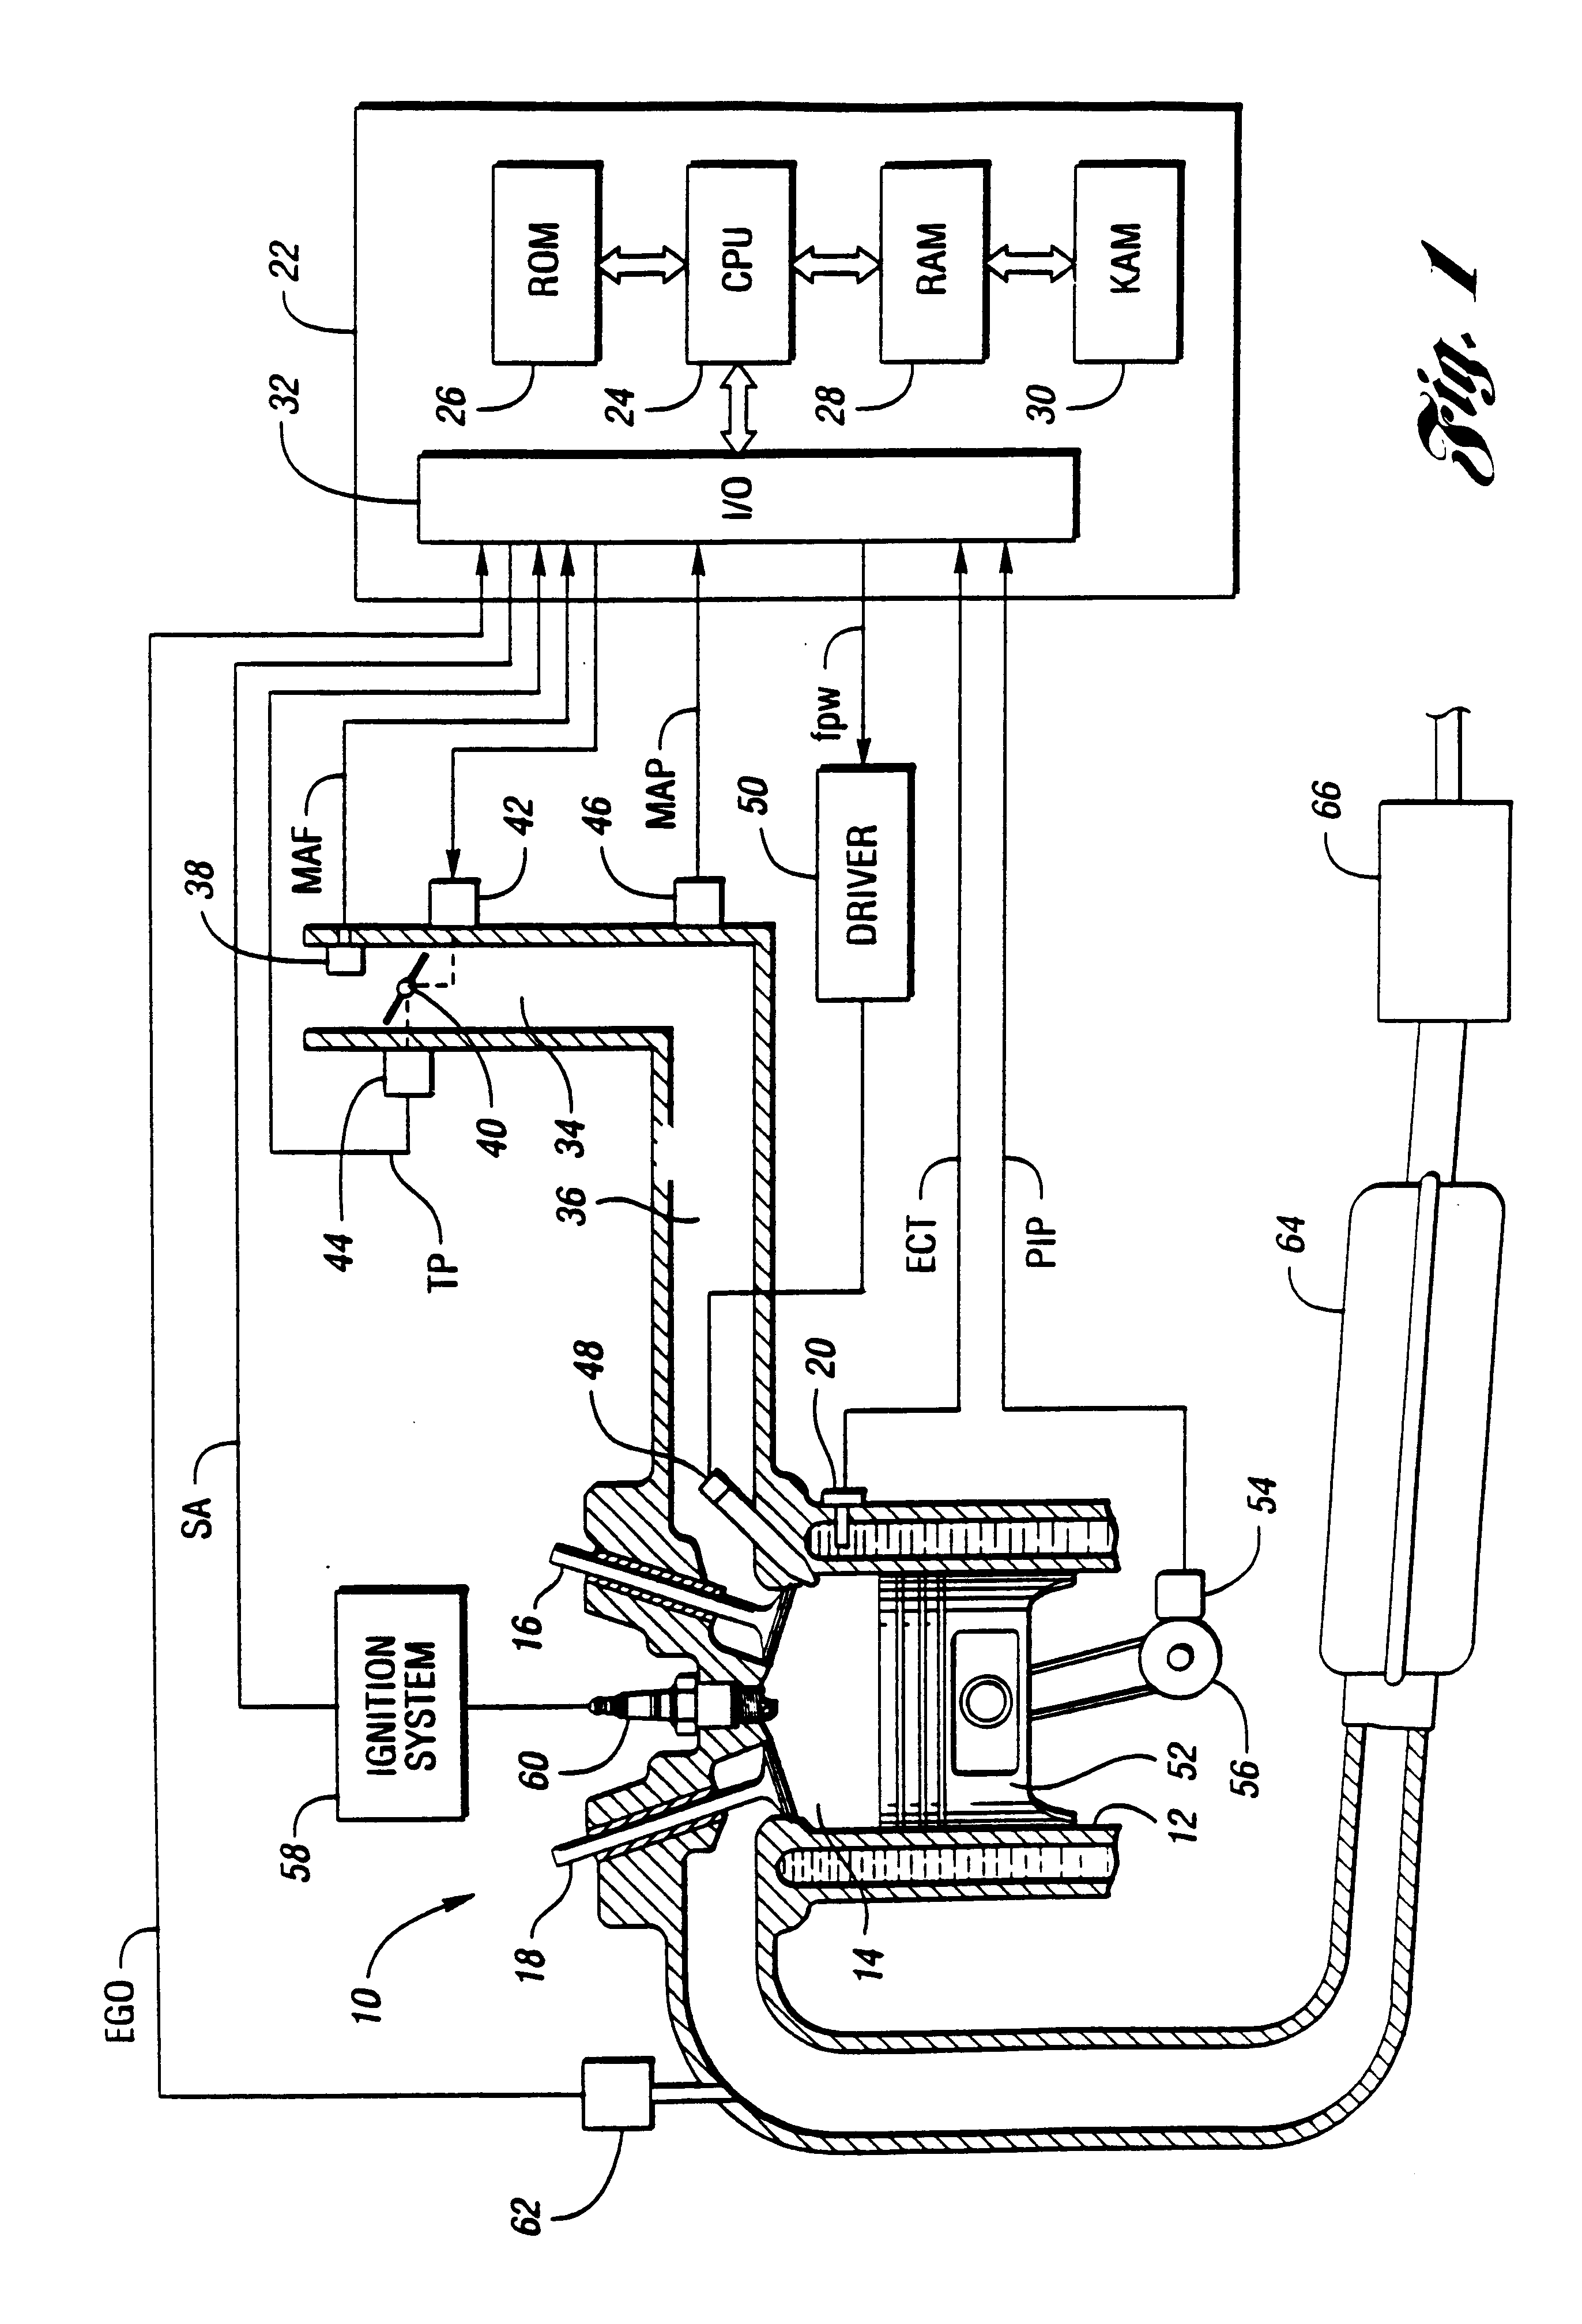 Feed-forward observer-based control for estimating cylinder air charge